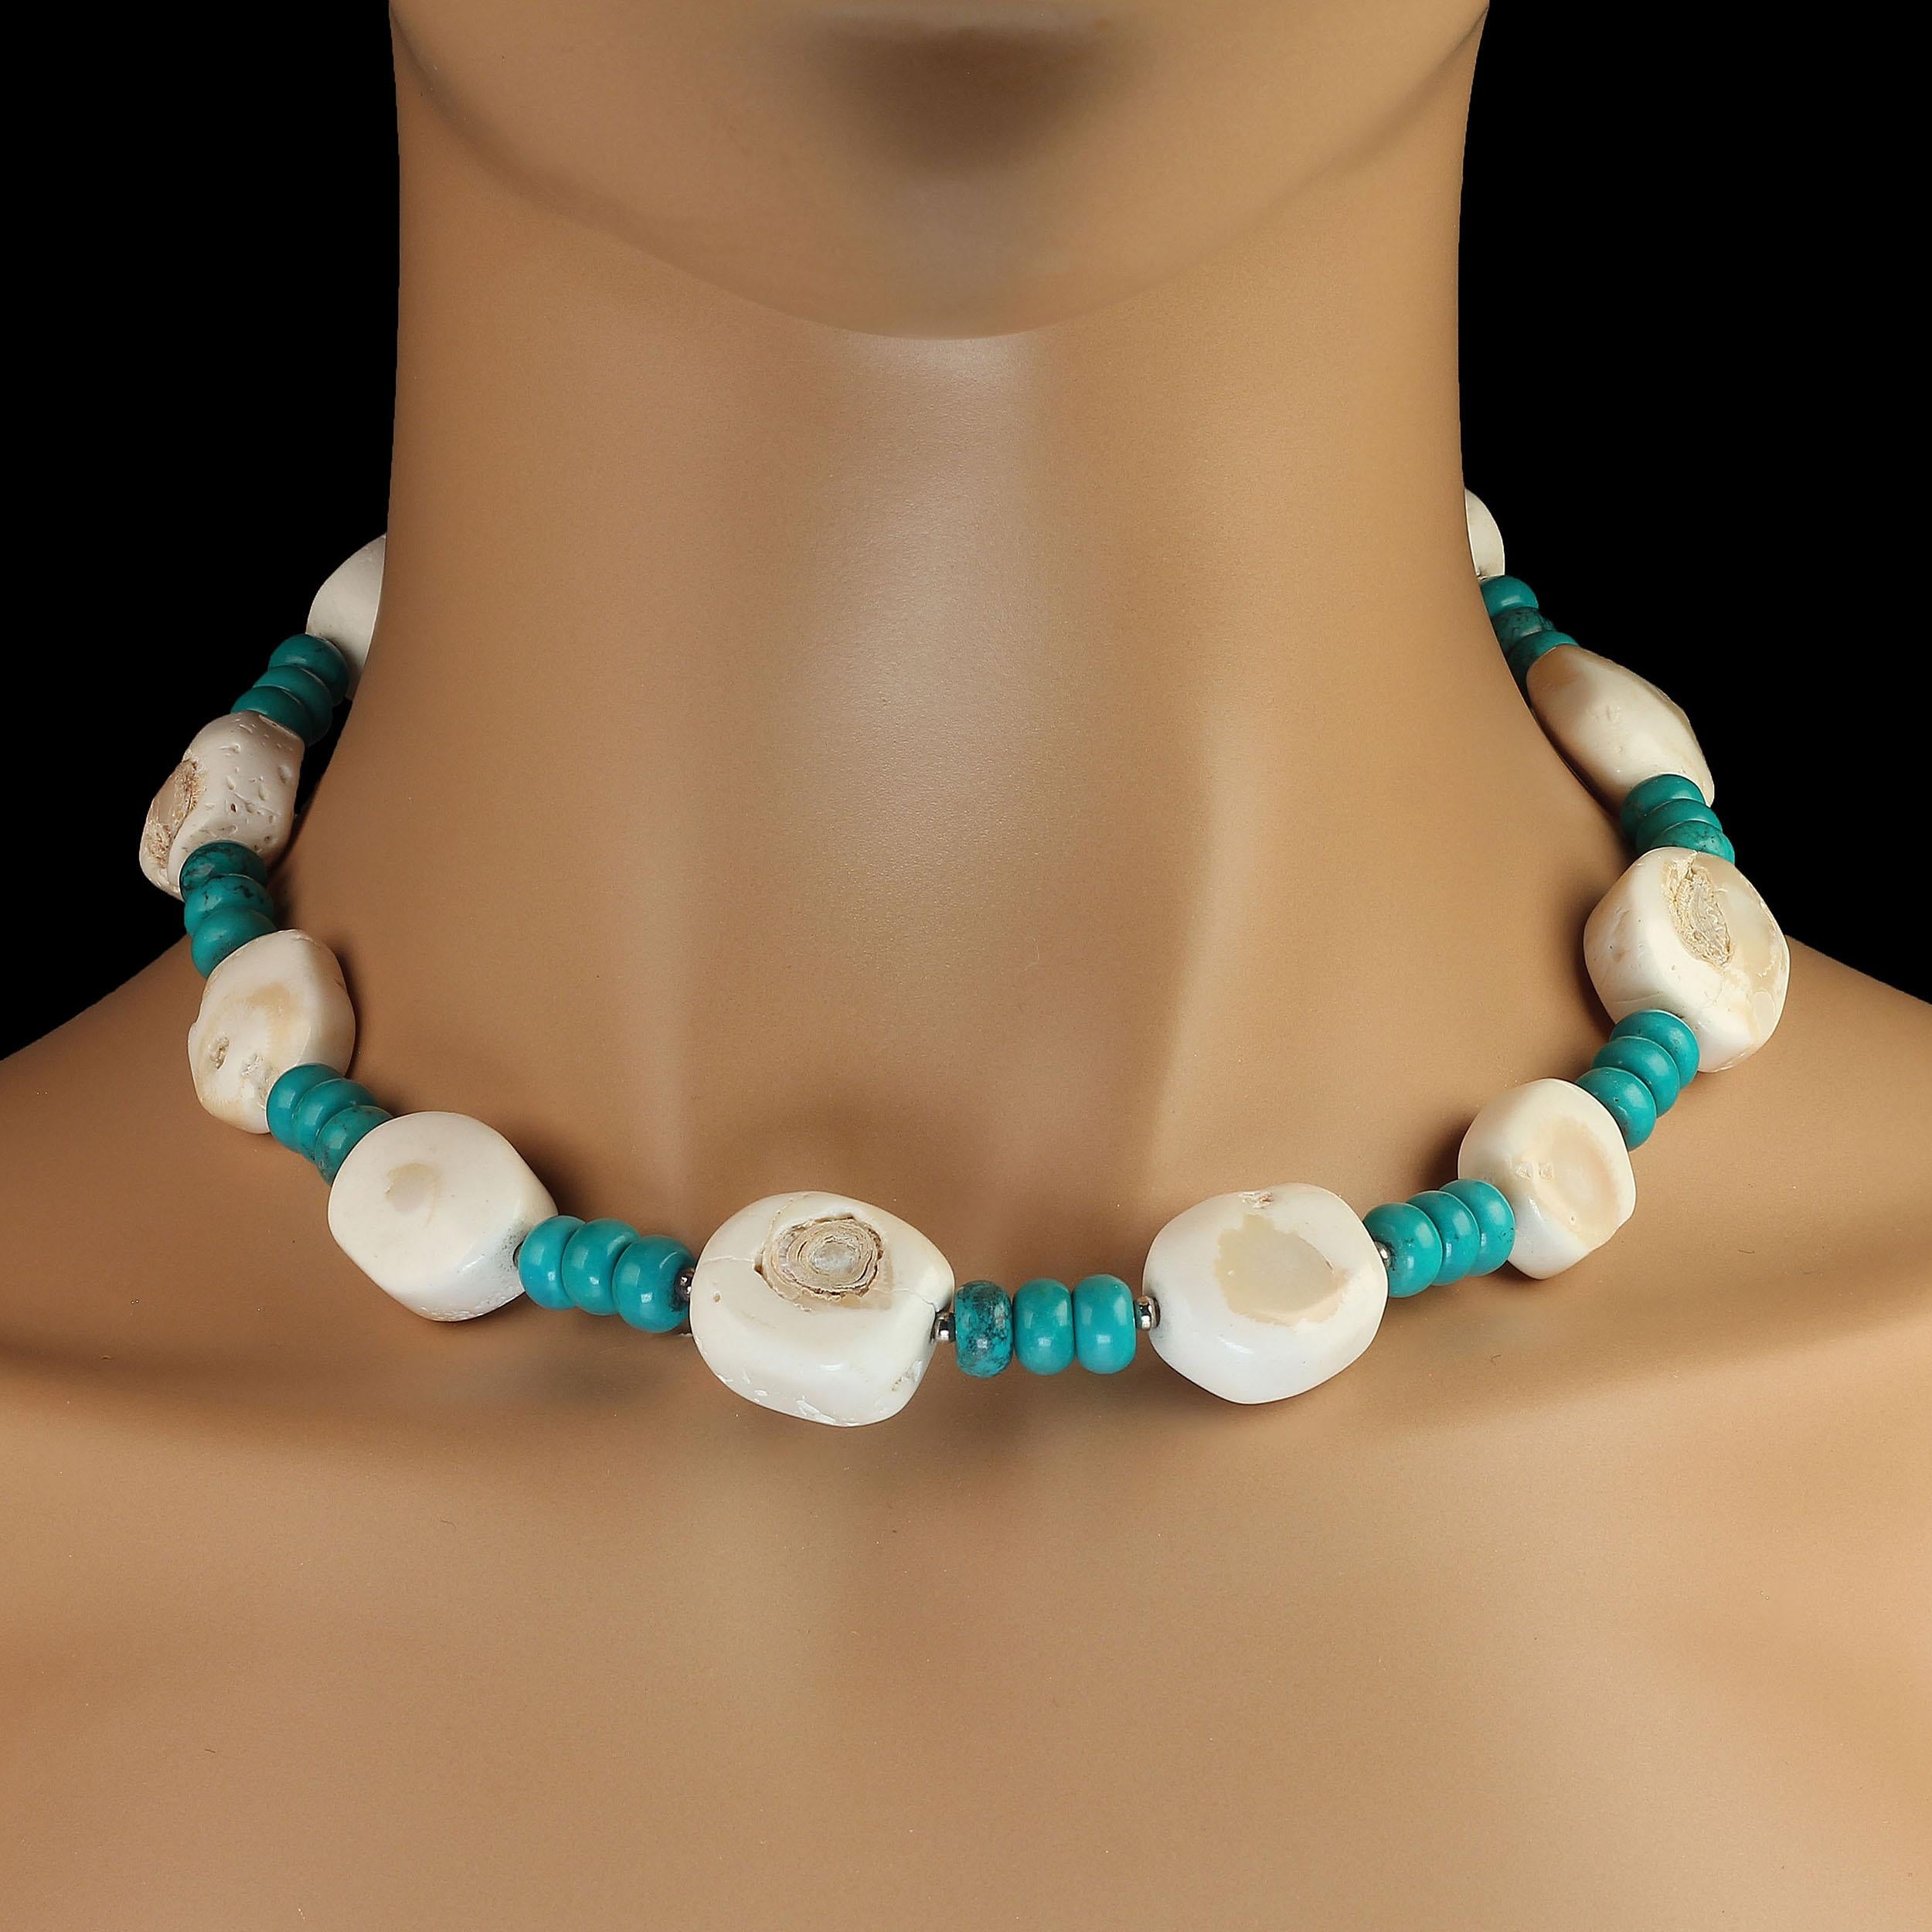 Unique necklace of Composite Turquoise Rondelles and White Bamboo Coral Slices. 18 inches of Blue and White Bliss. White Bamboo Coral with lots of character and tiny silver tone spacers along with composite turquoise rondelles make this handmade